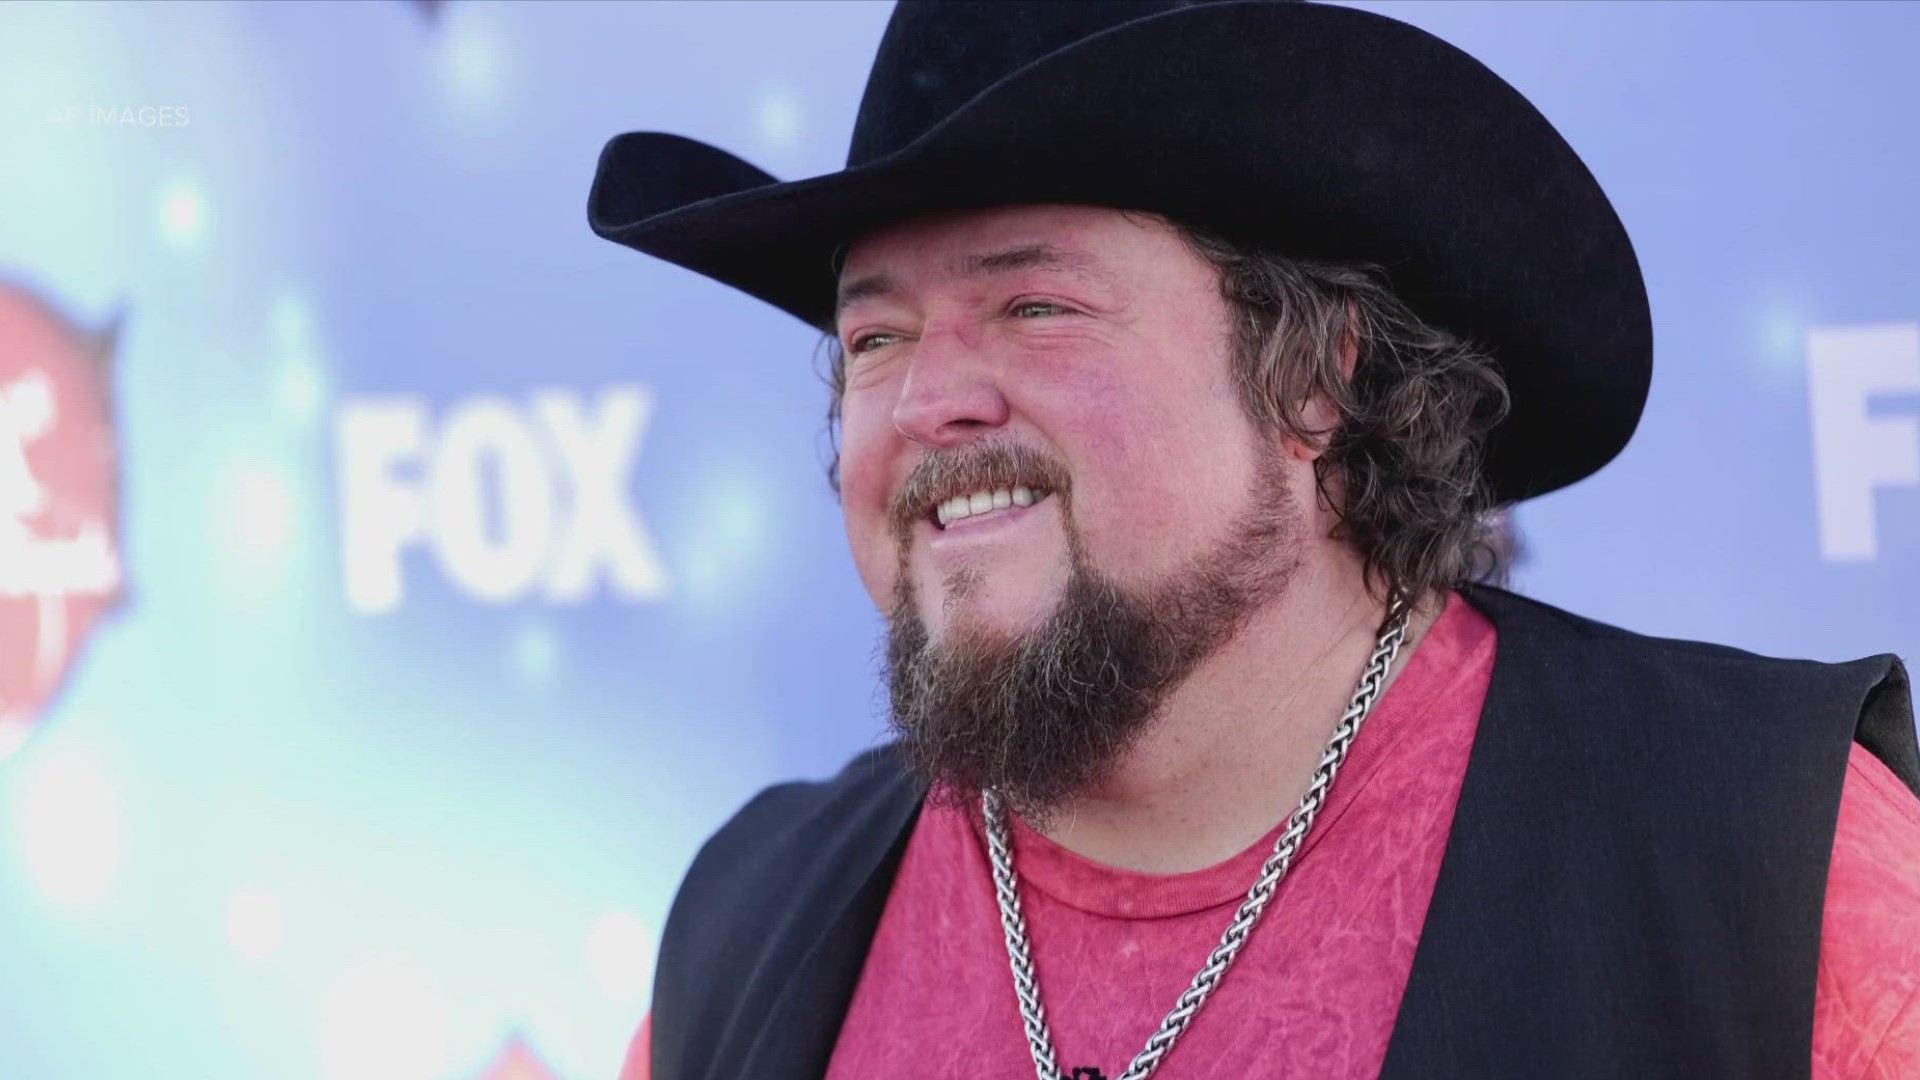 Country musician Colt Ford is hospitalized after sufferning a heart attack after performing at an Arizona bar Thursday night, according to a spokesperson.